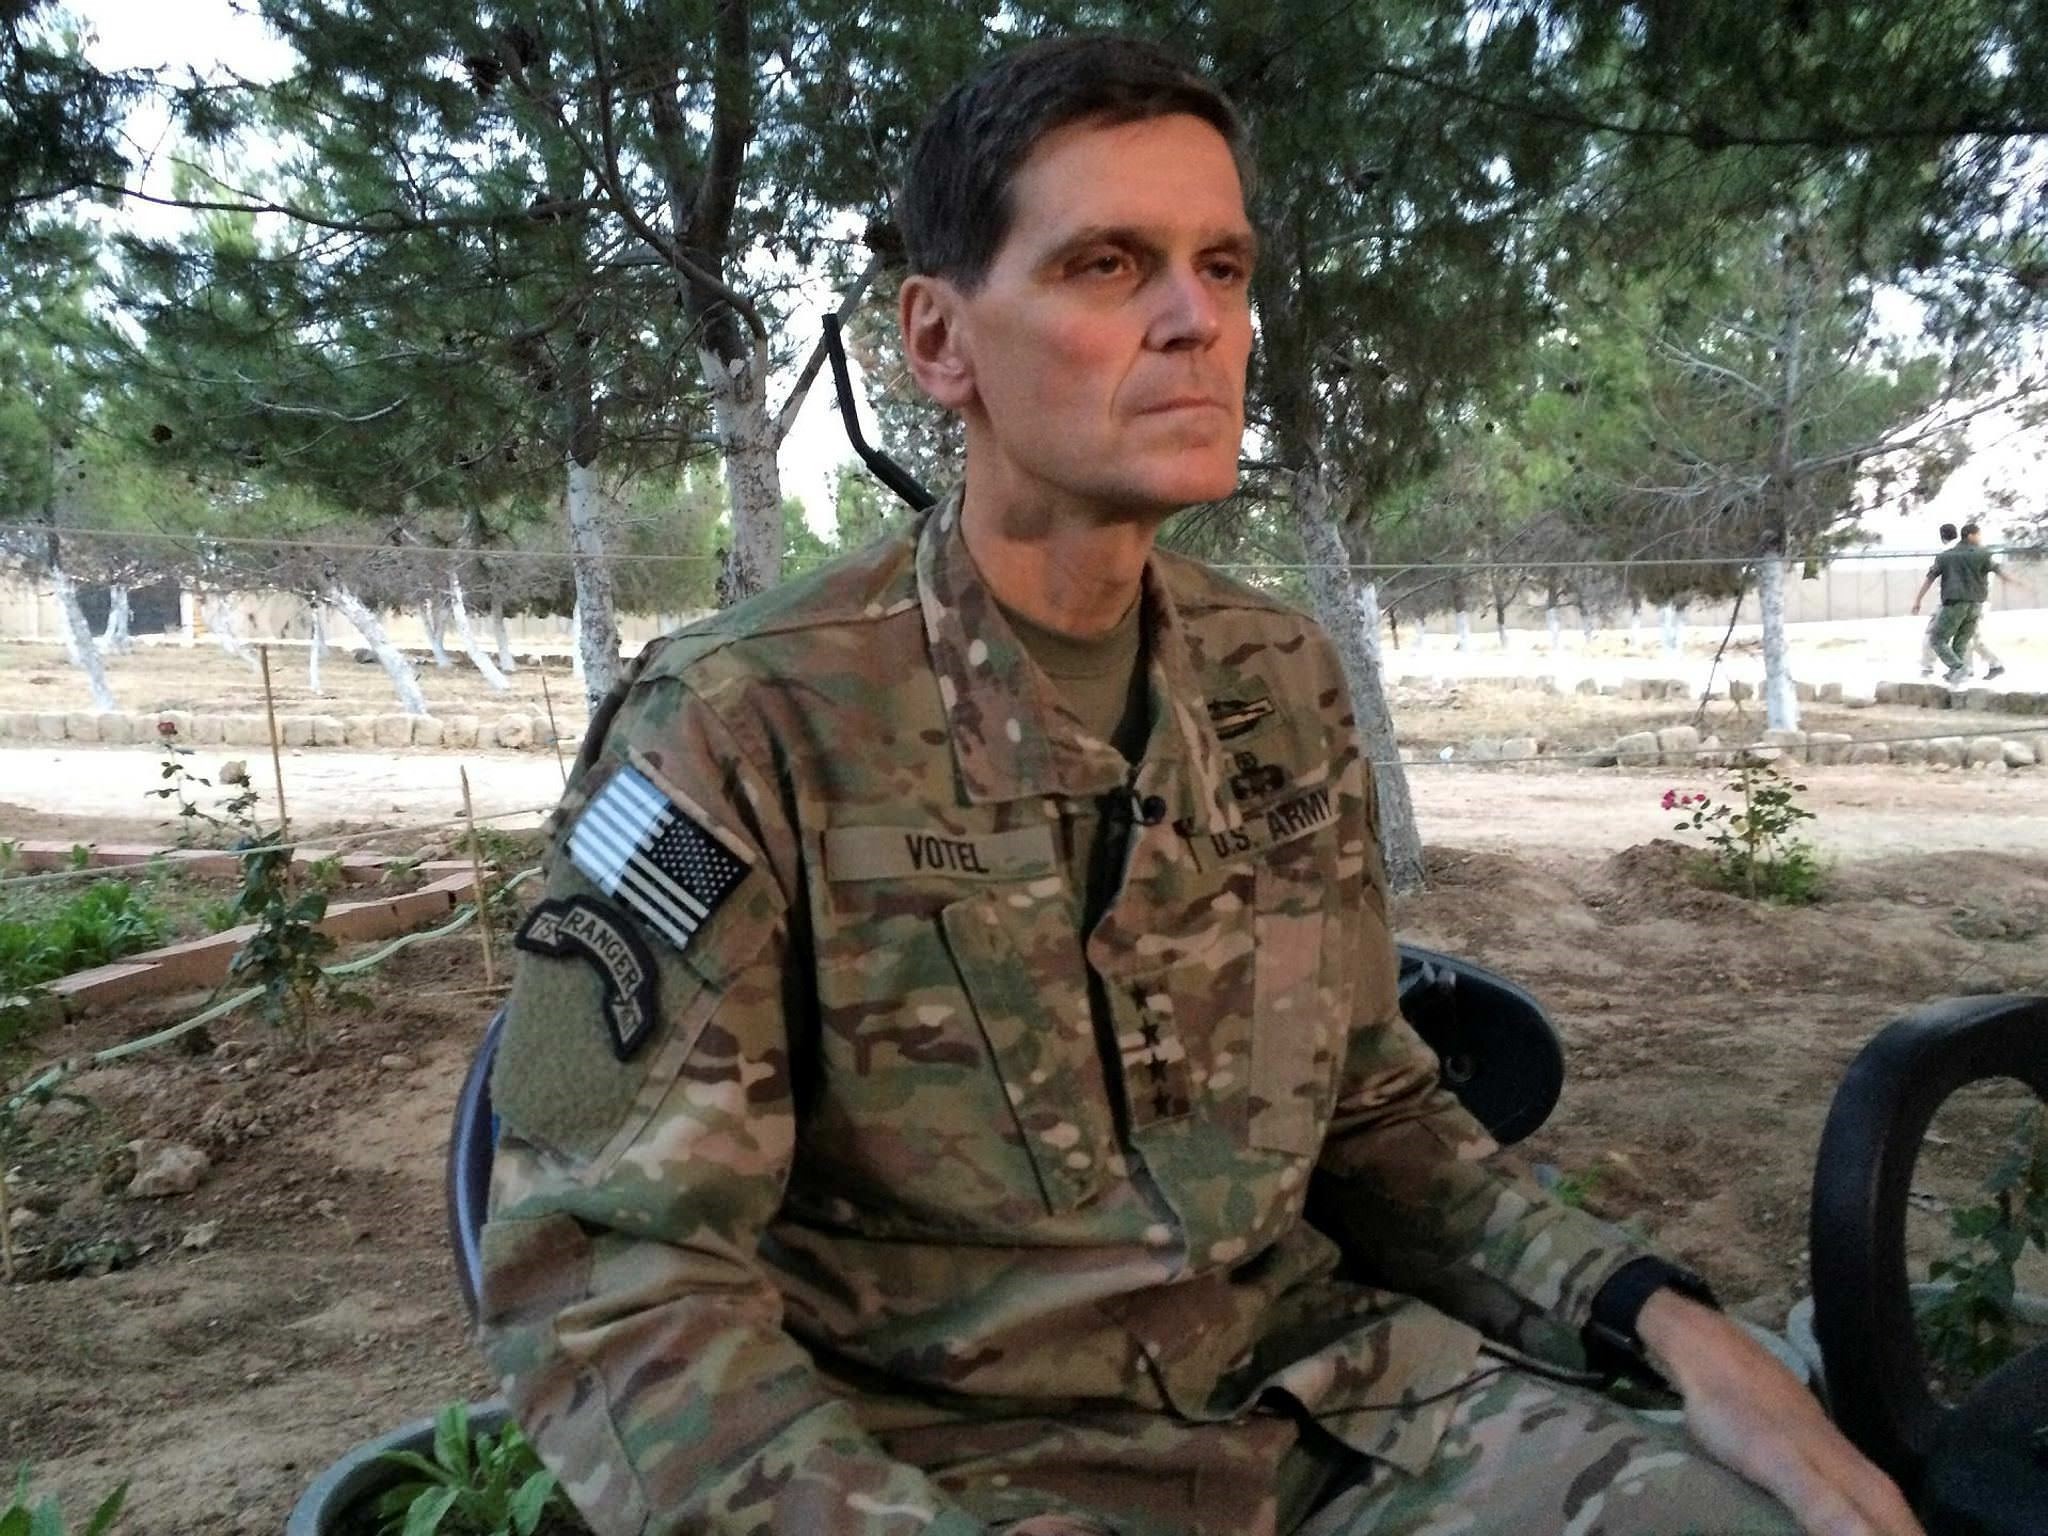 Army Gen. Joseph Votel speaks to reporters Saturday, May 21, 2016 during a secret trip to Syria. (AP Photo)